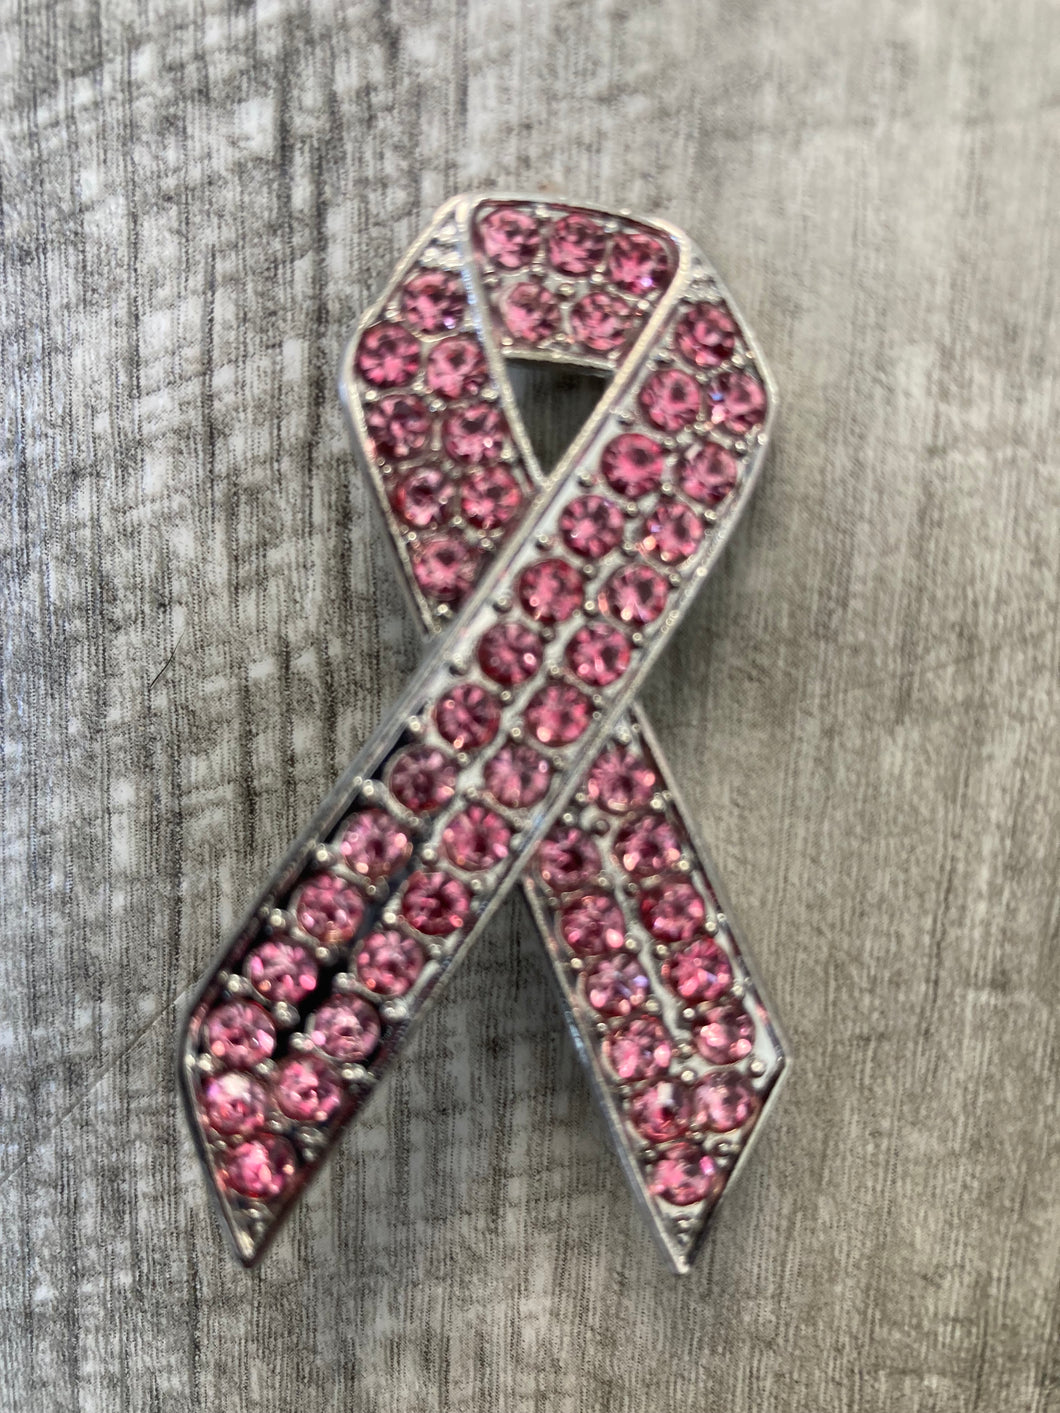 NEW Breast Cancer Pins (35 total)